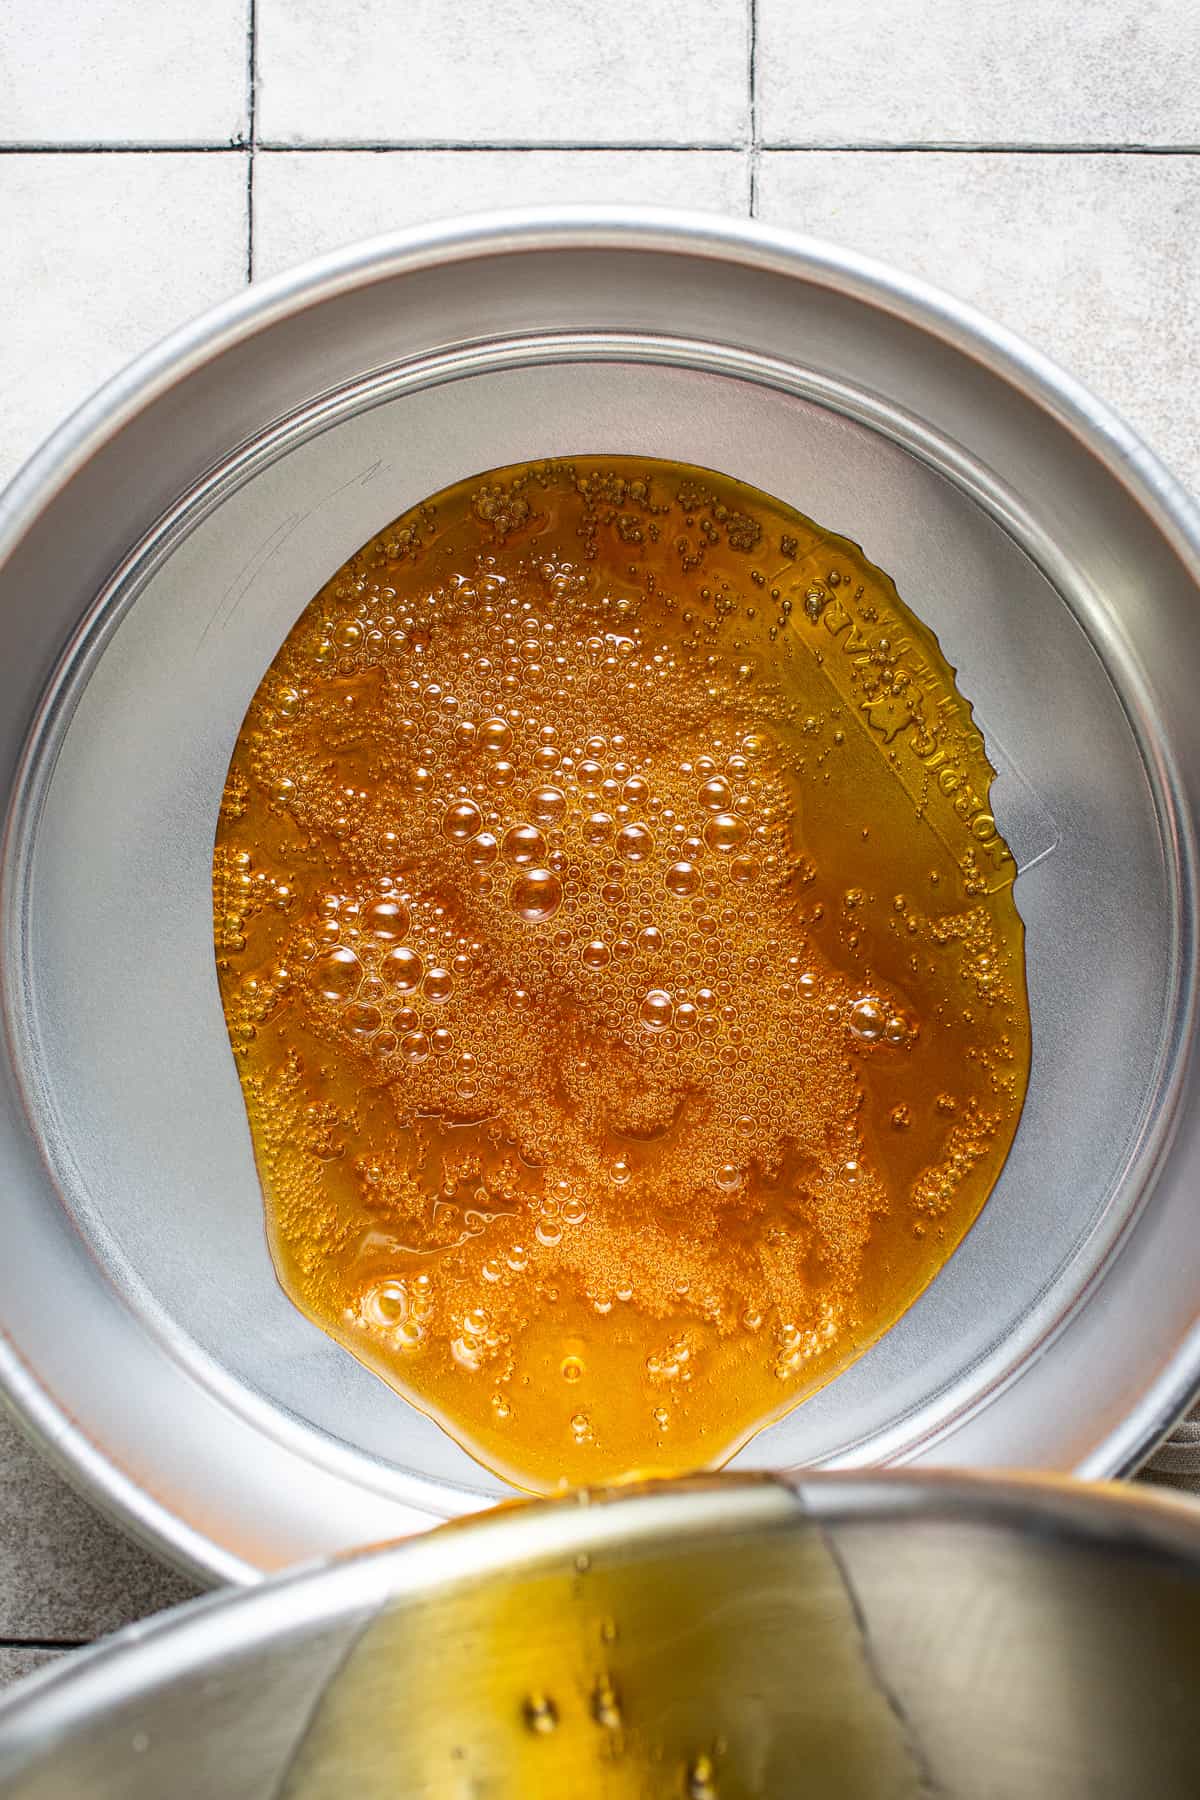 Caramel being poured into a round cake pan for flan de queso.